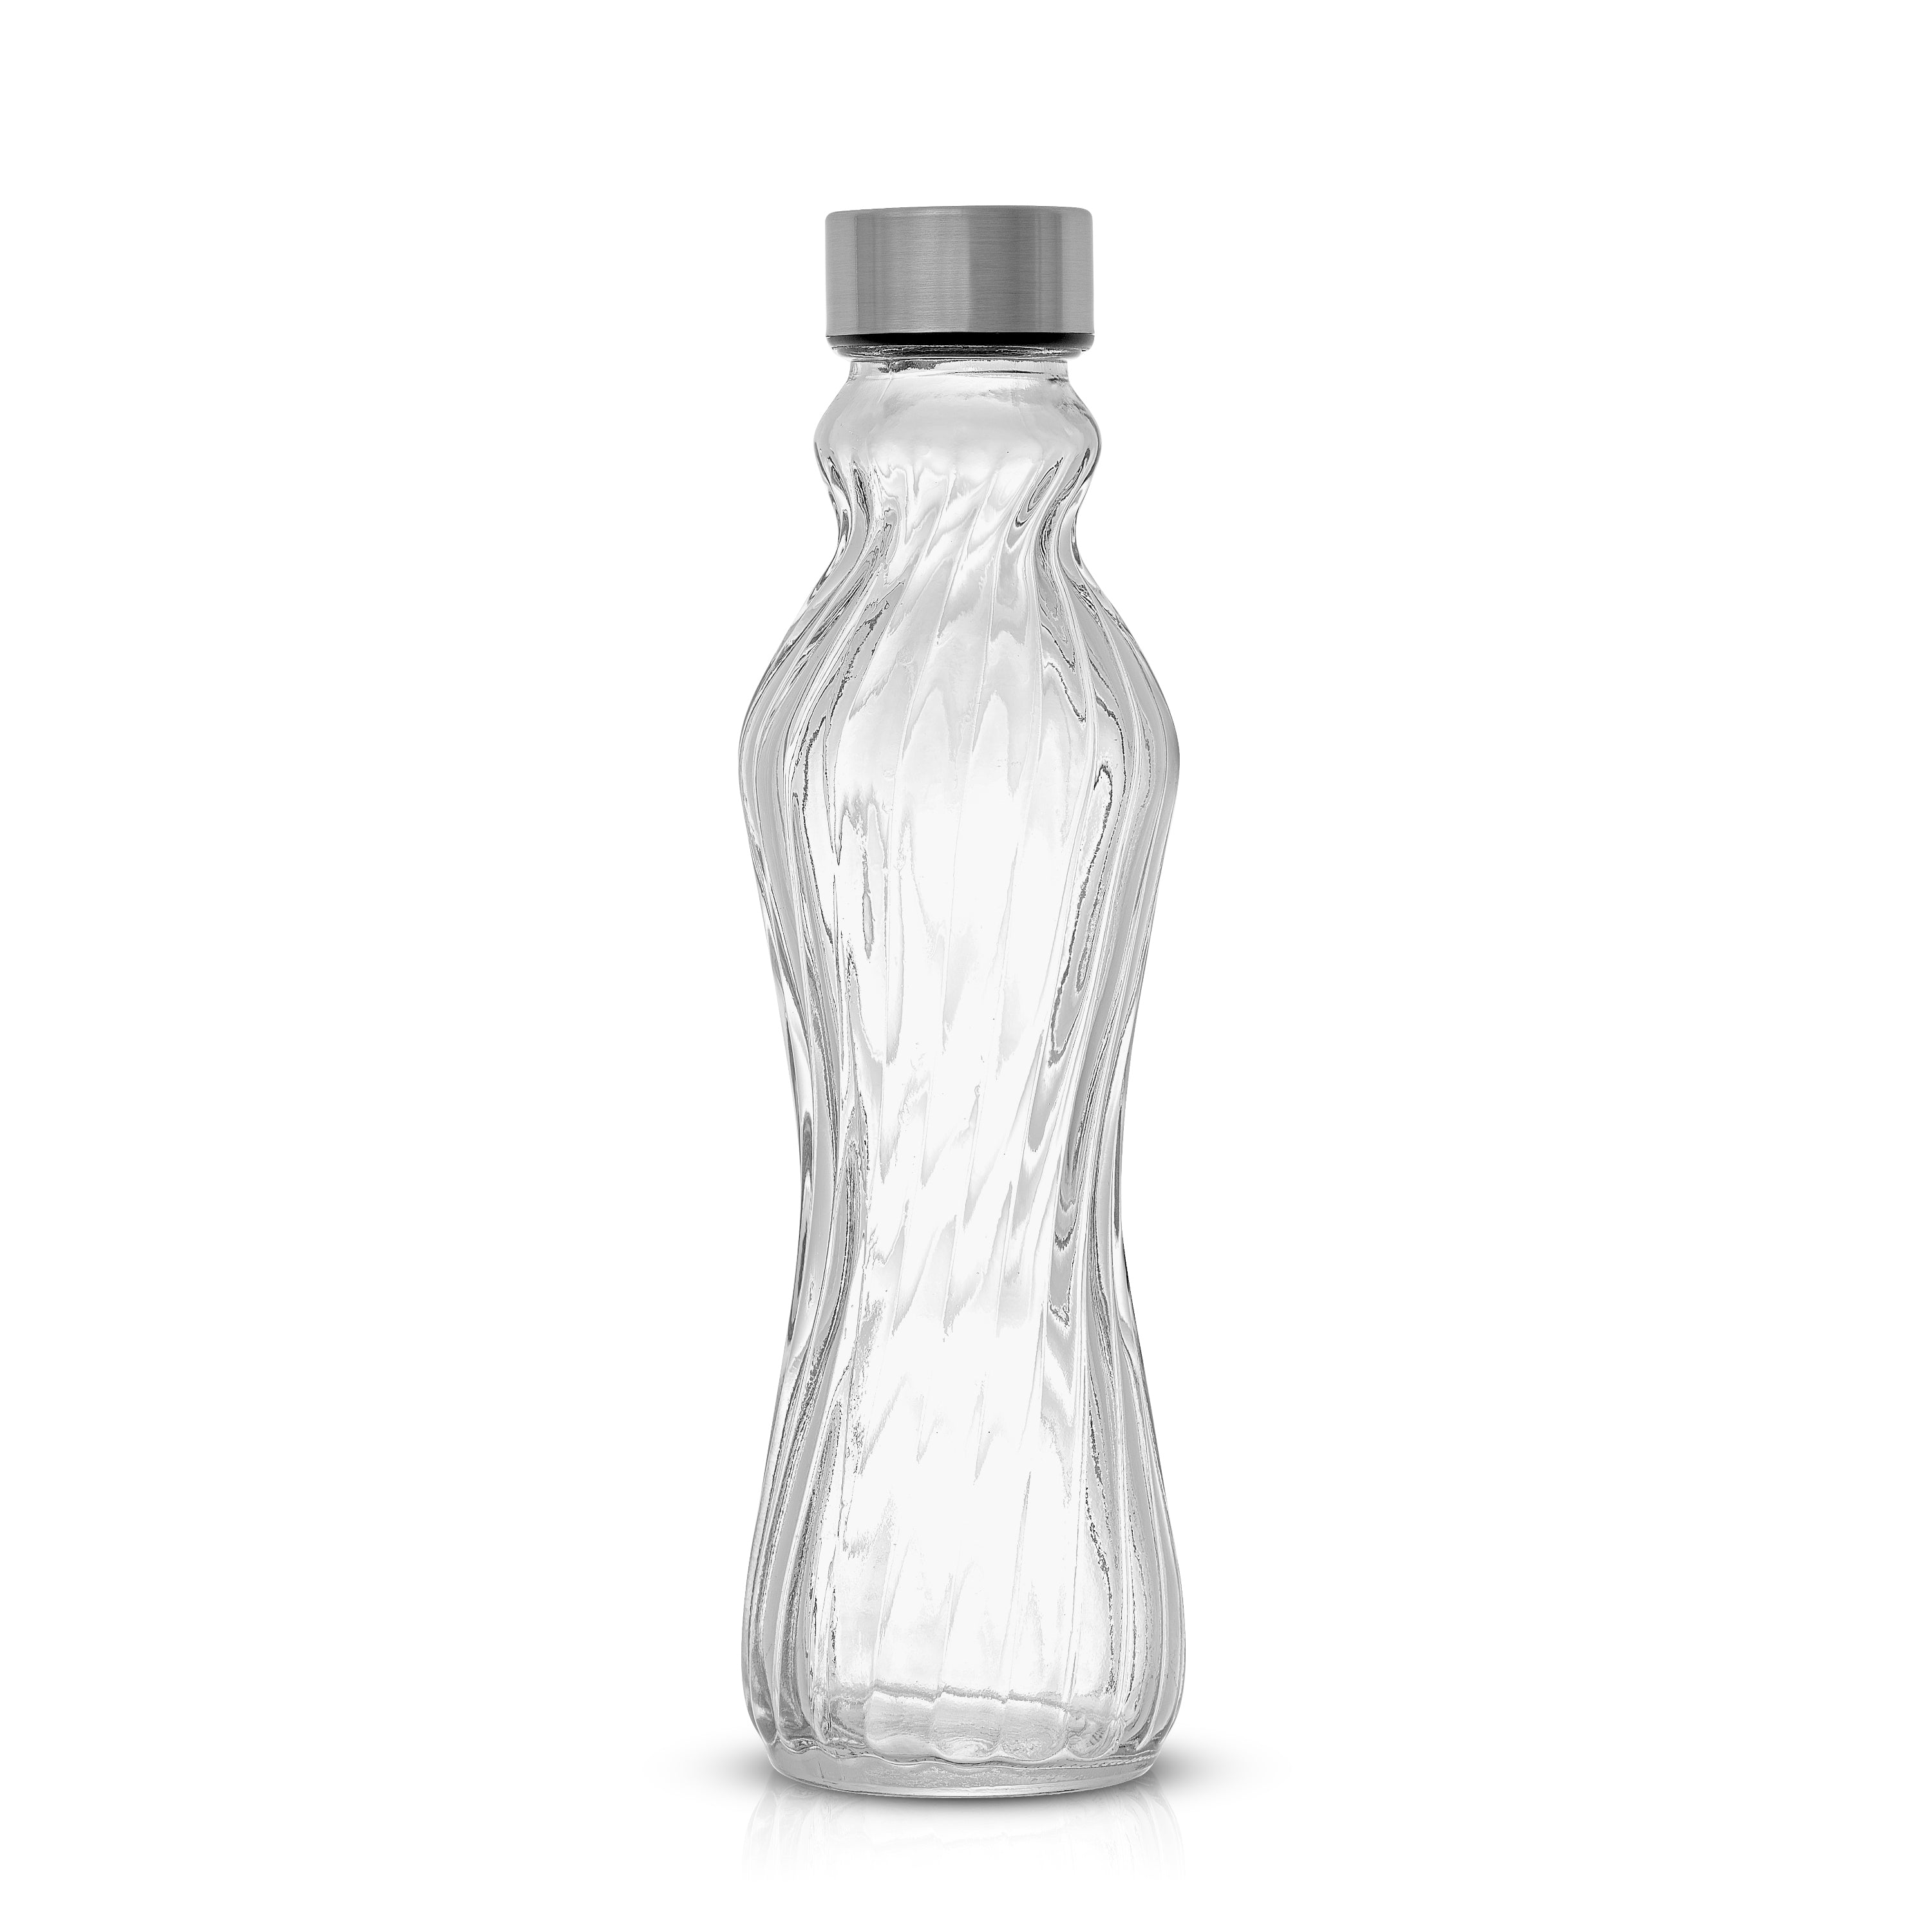 Spring Glass Insulated Water Bottles with Stainless Steel Cap - 18 oz - Set of 6